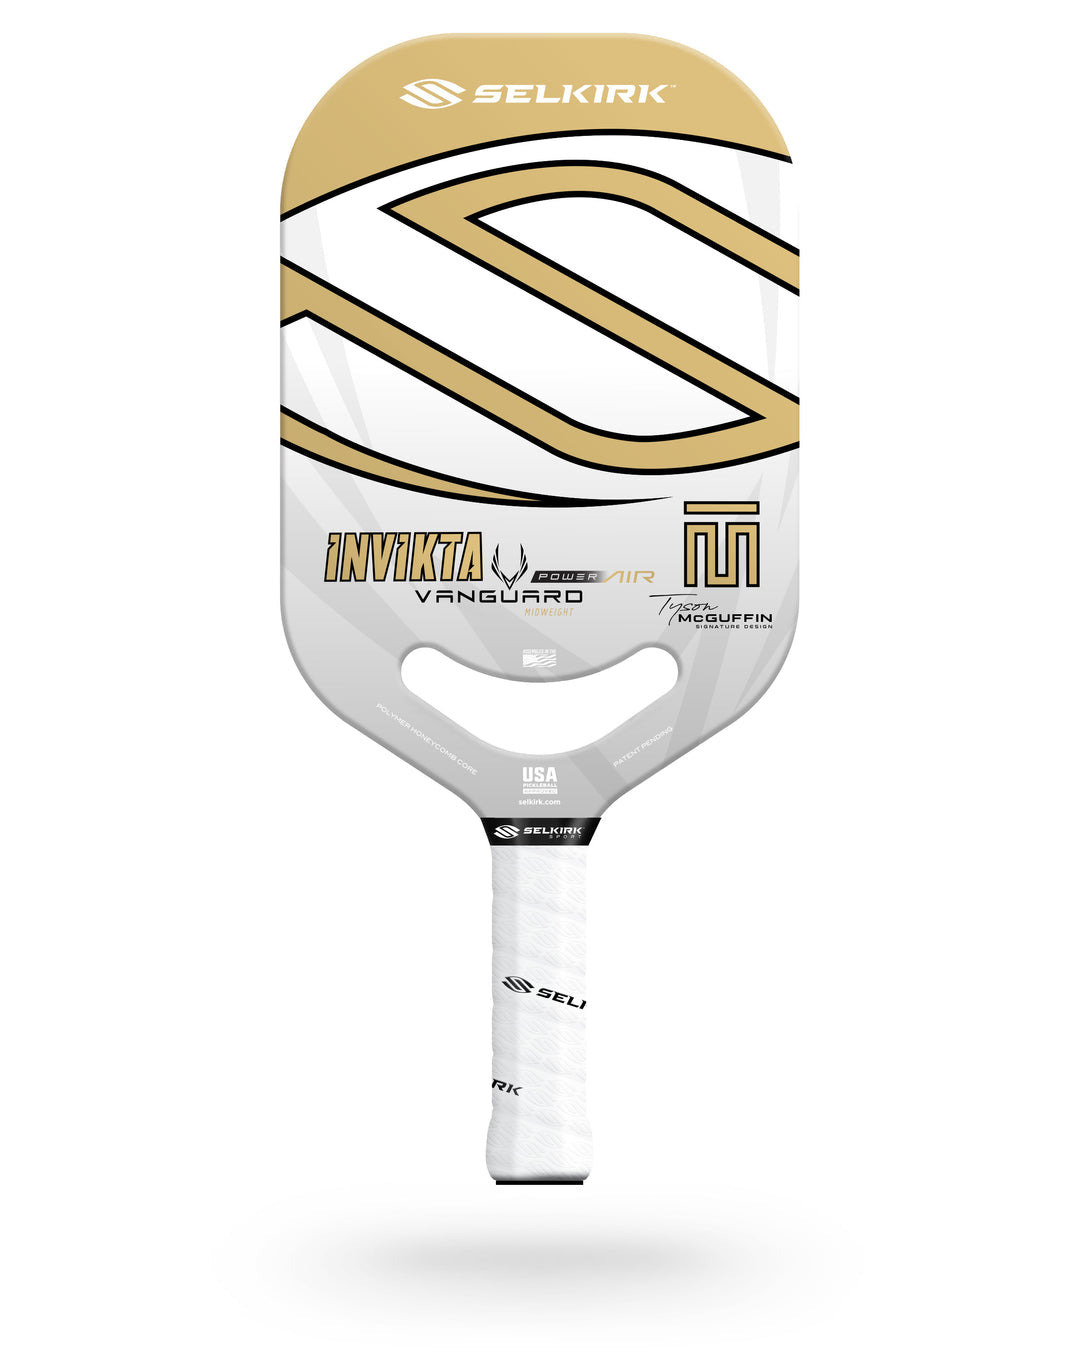 A Selkirk Power Air Invikta Pickleball Paddle with a gold and white design.